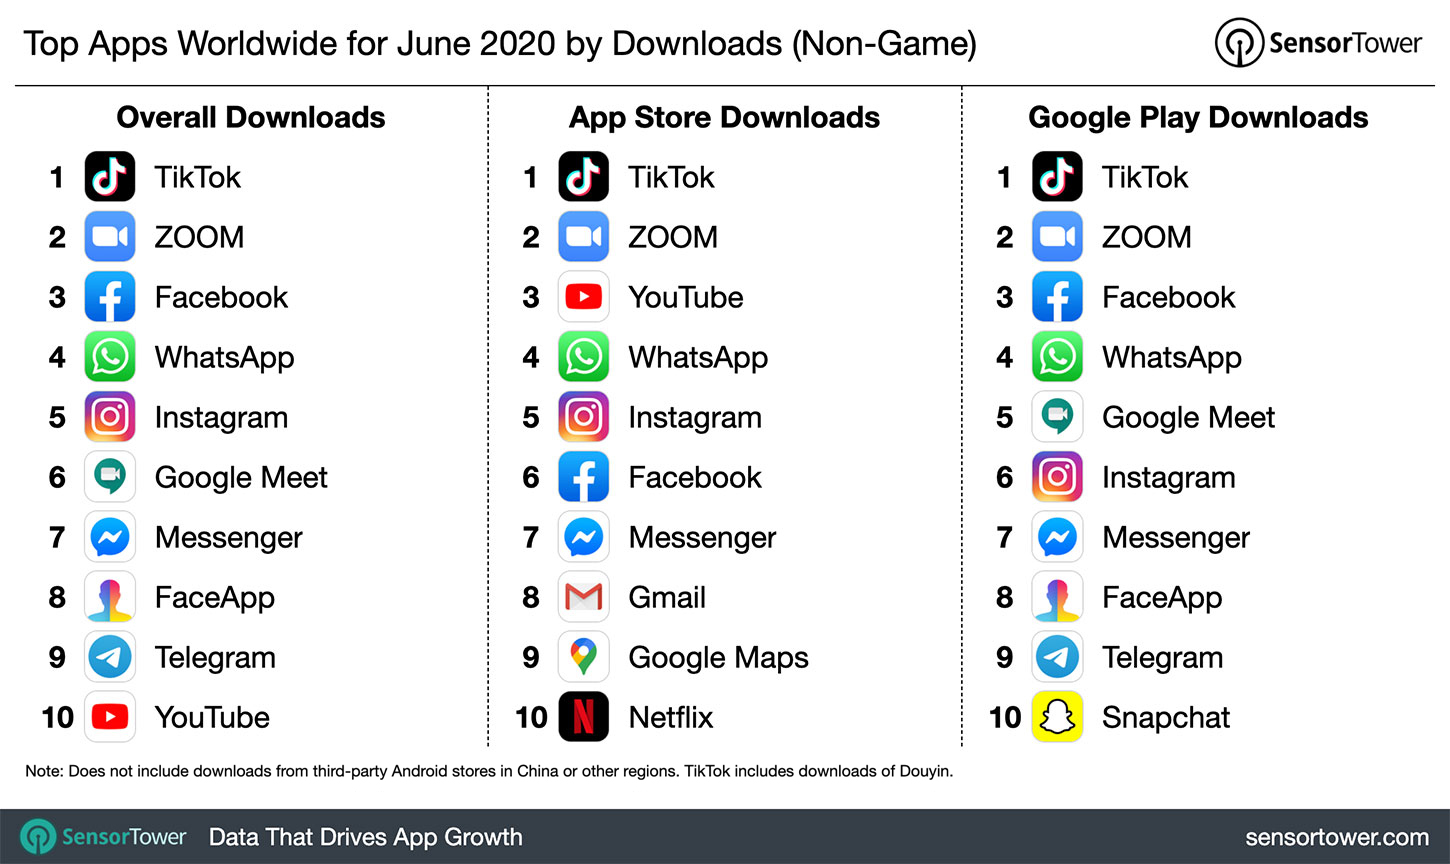 Top Apps Worldwide for June 2020 by Downloads